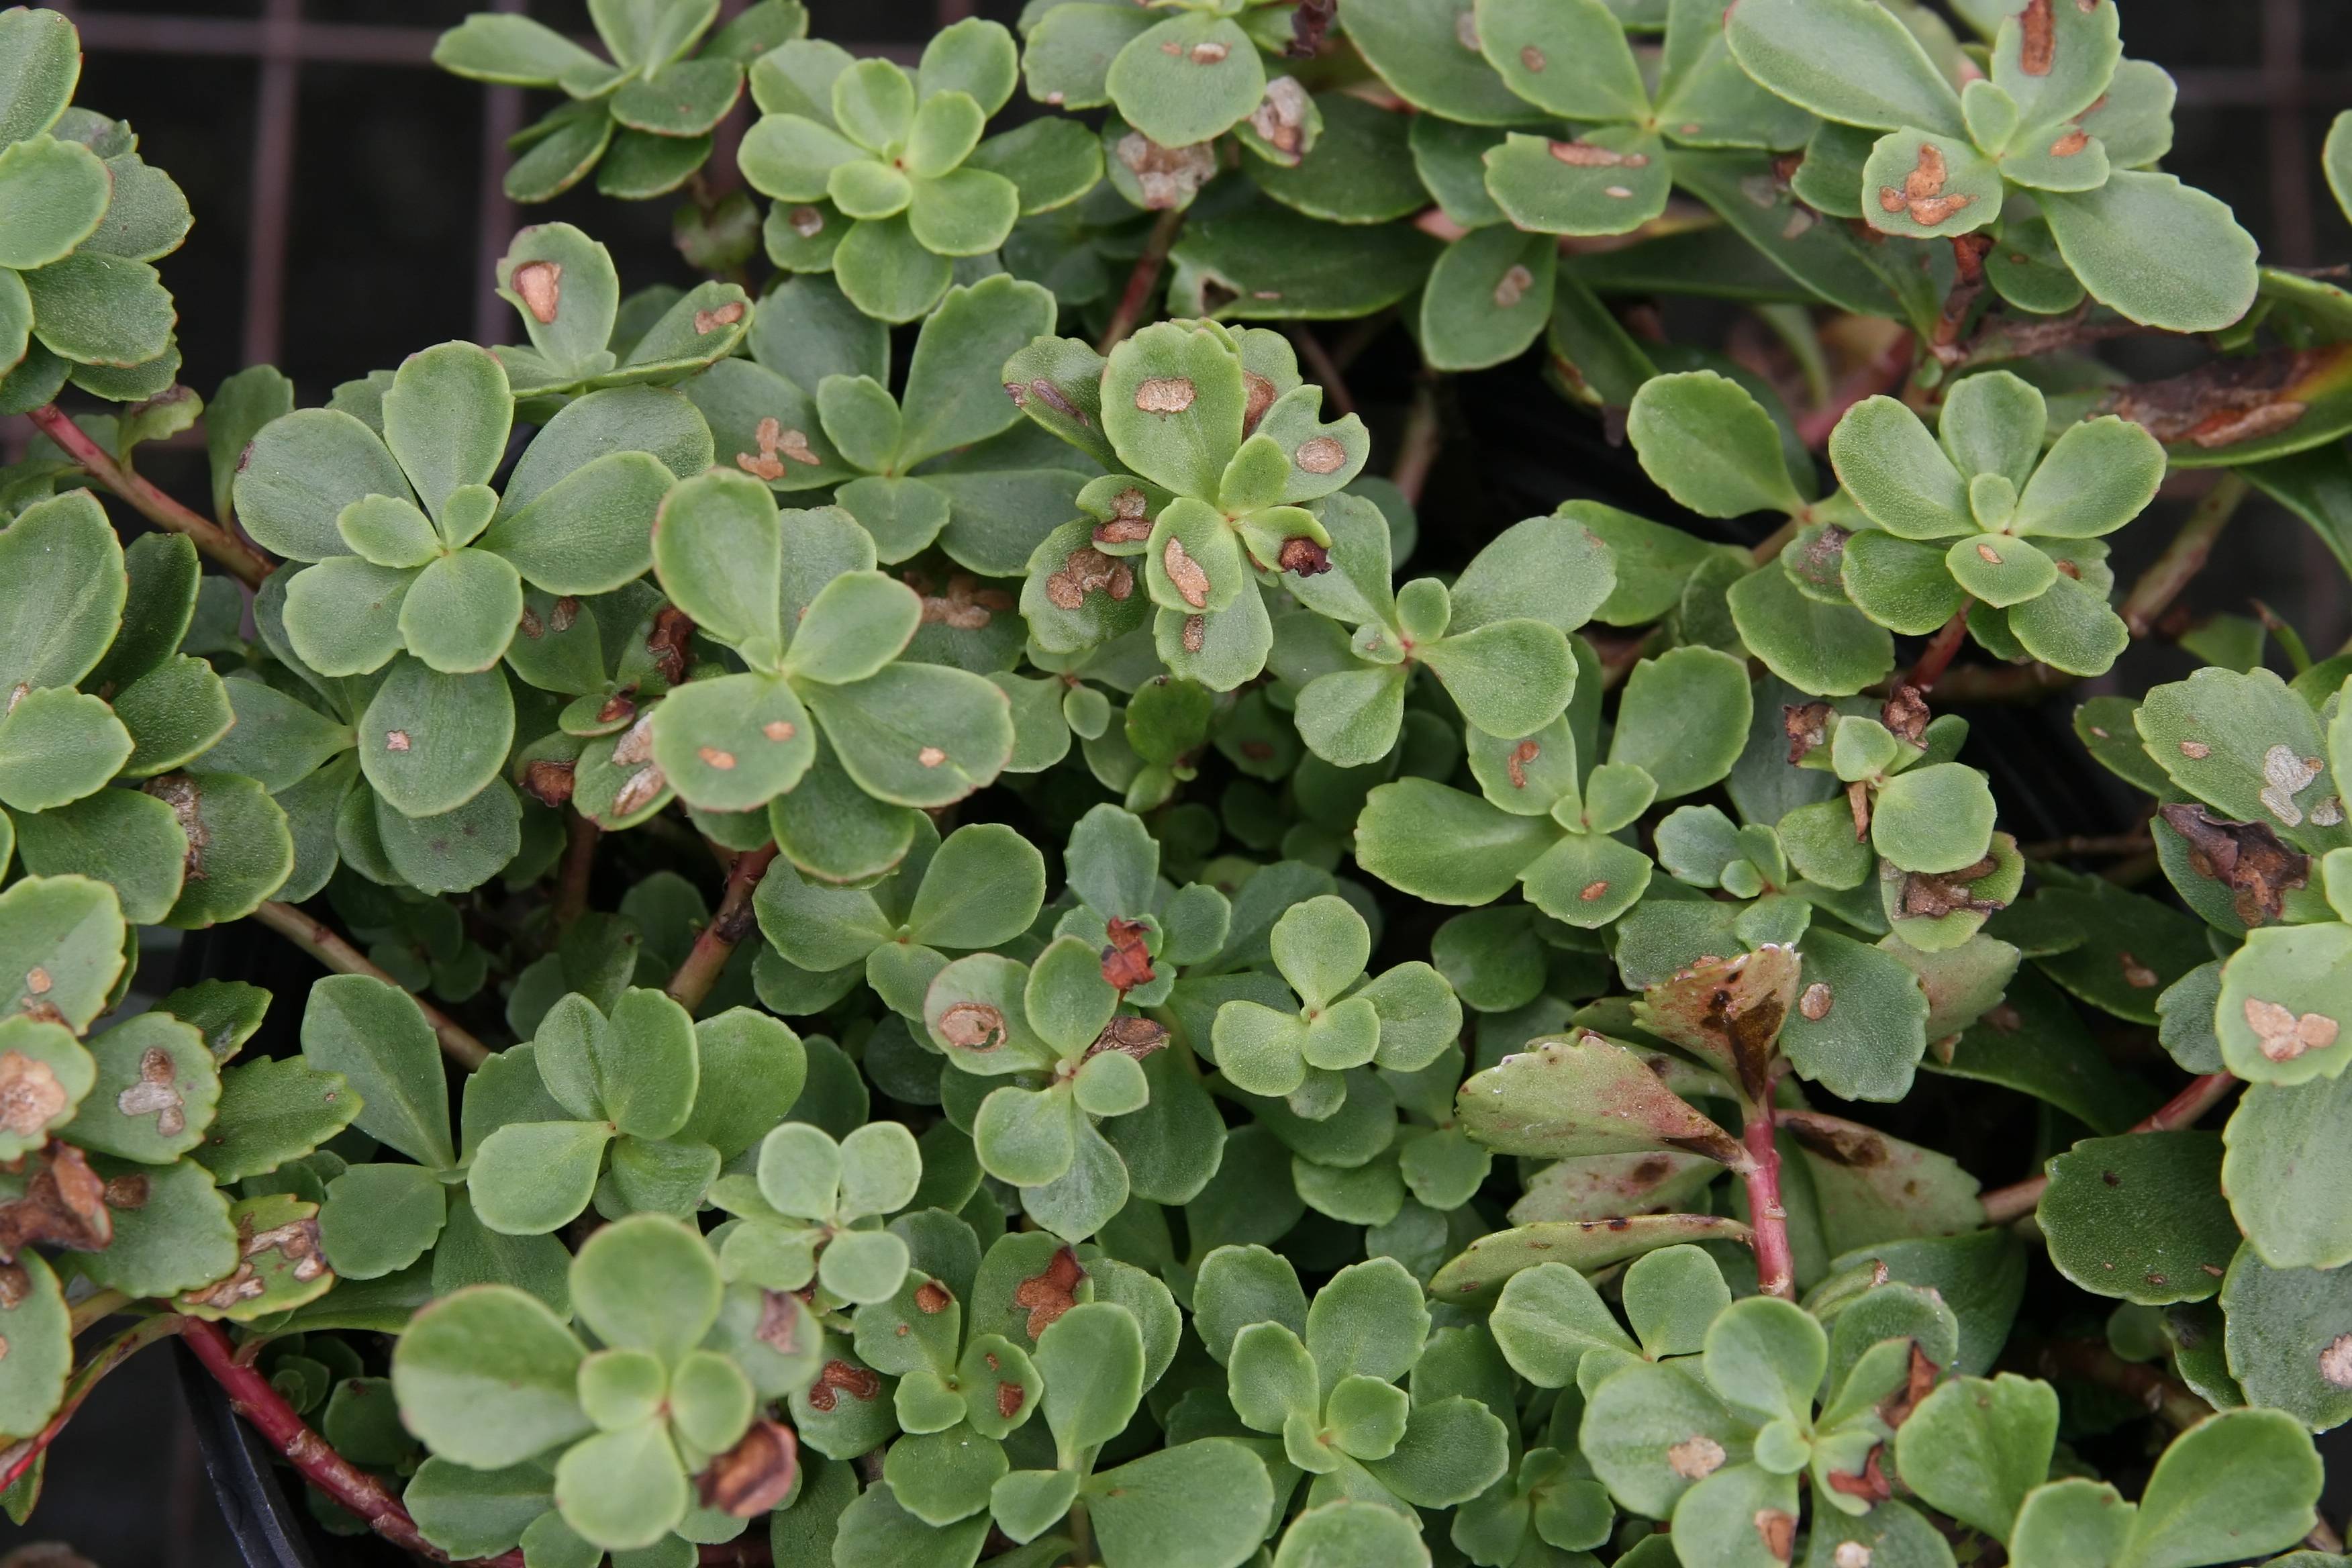 obovate, green, small, smooth leaves with red-green stems